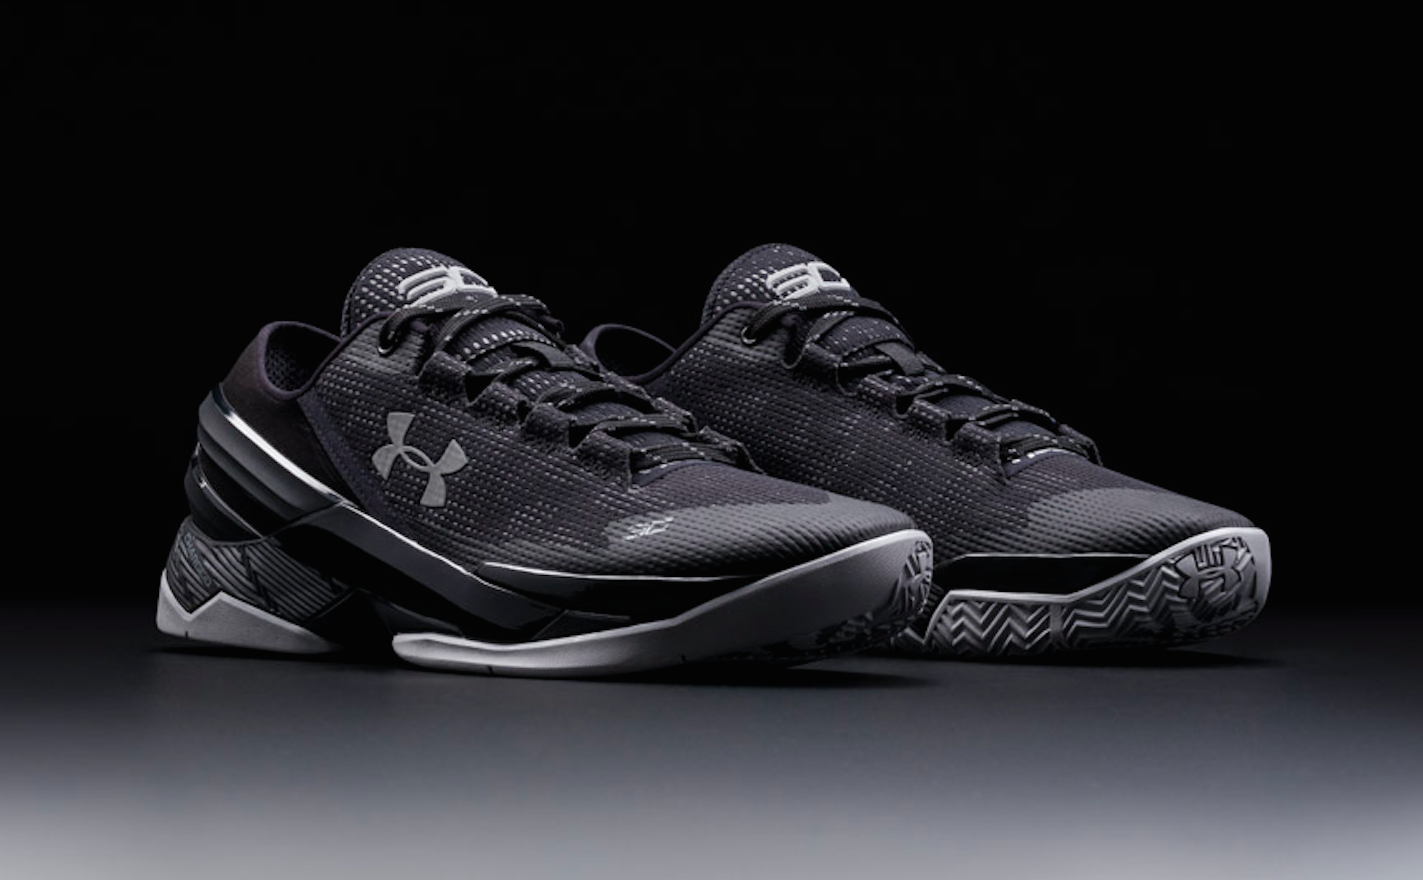 Curry 2 Low - Release Info for 'The Hook' and 'The Essential' - THD Kicks